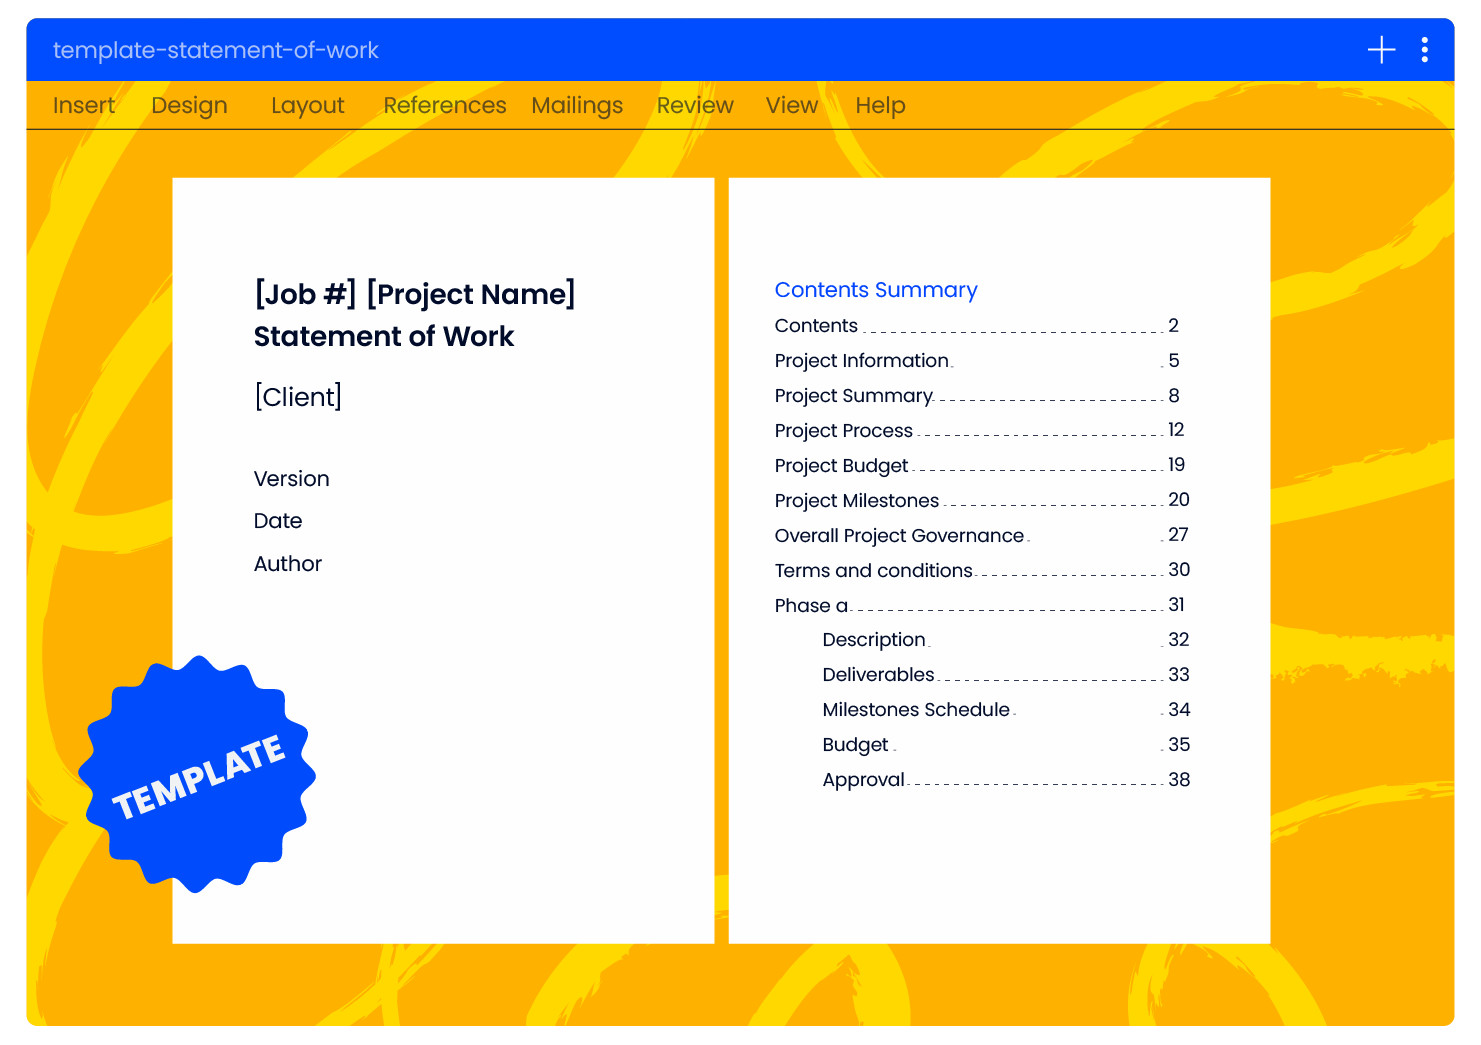 DPM's statement of work template